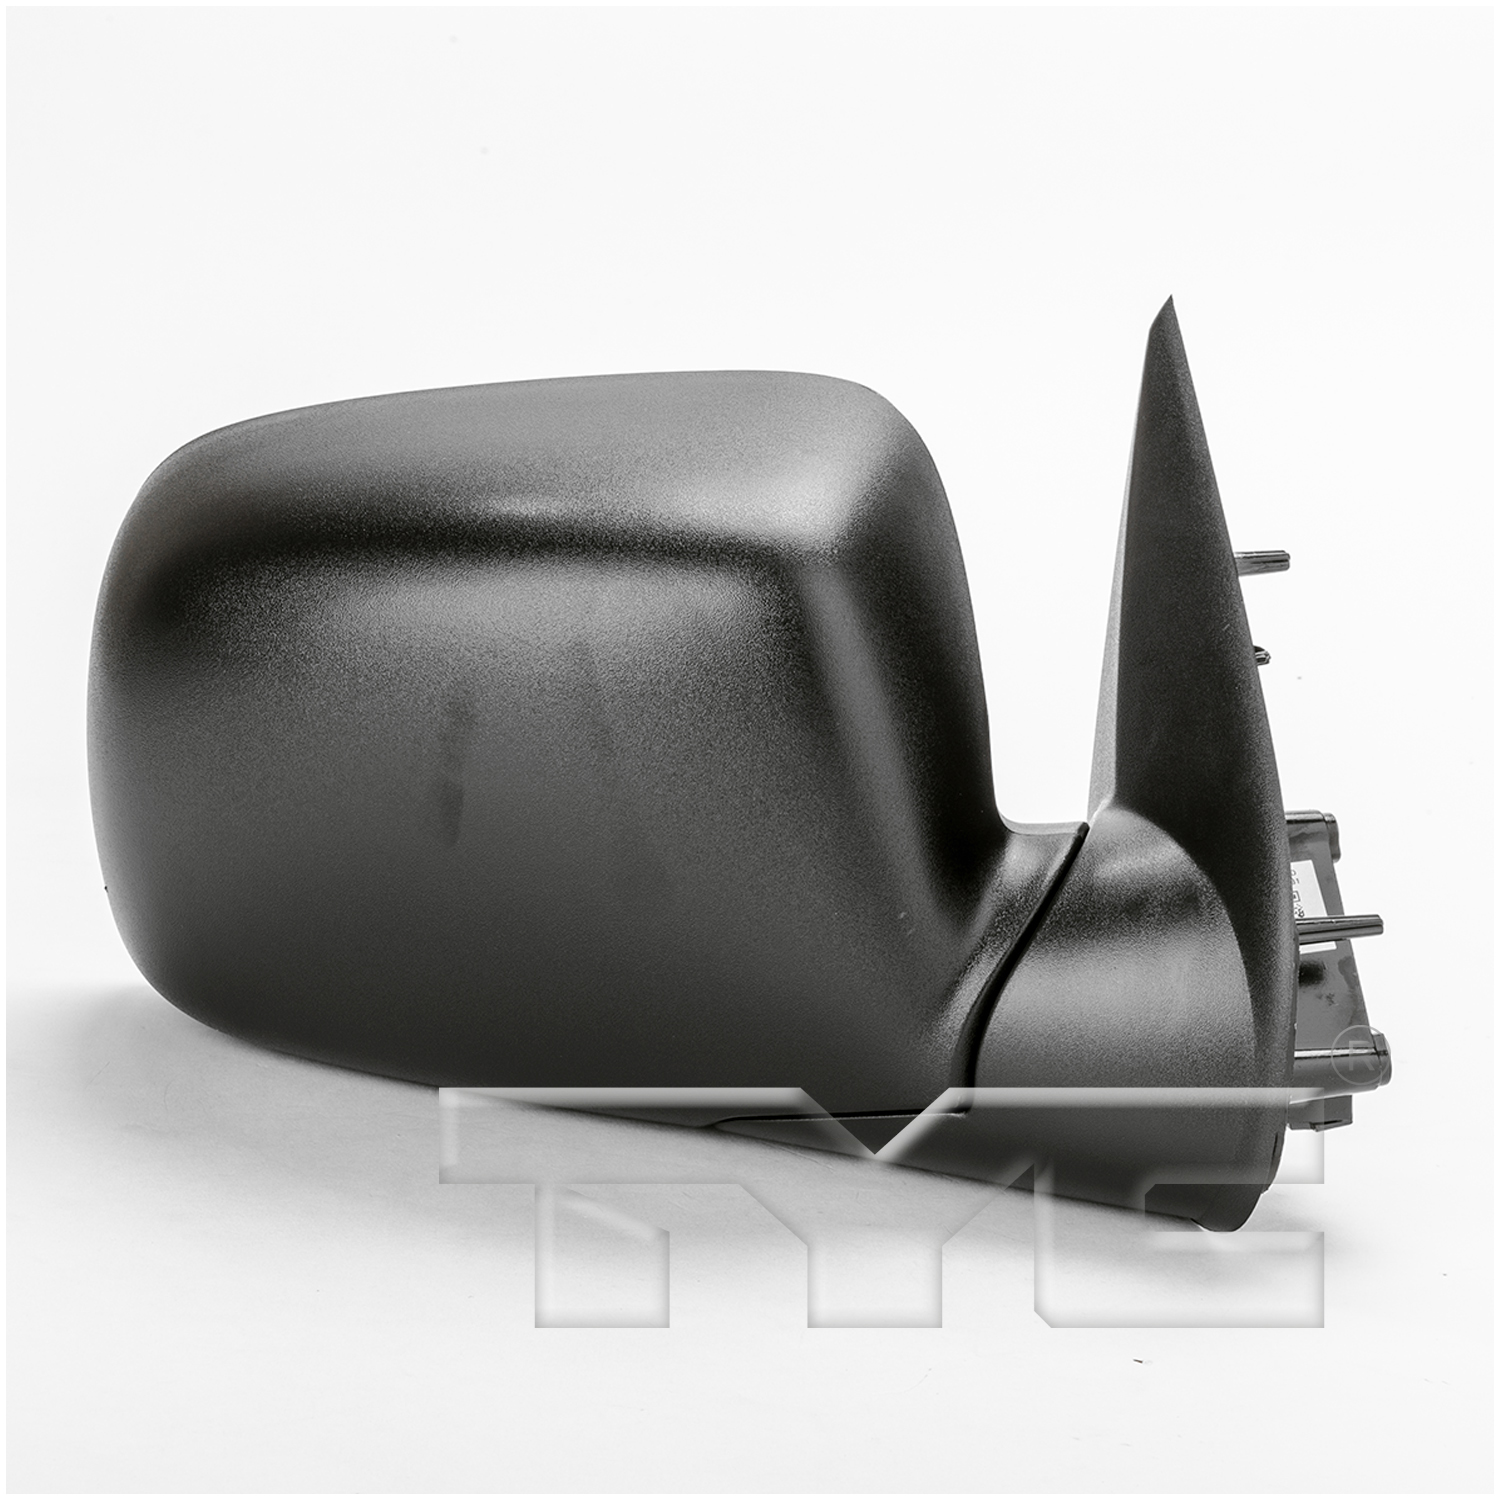 Aftermarket MIRRORS for CHEVROLET - COLORADO, COLORADO,04-12,RT Mirror outside rear view